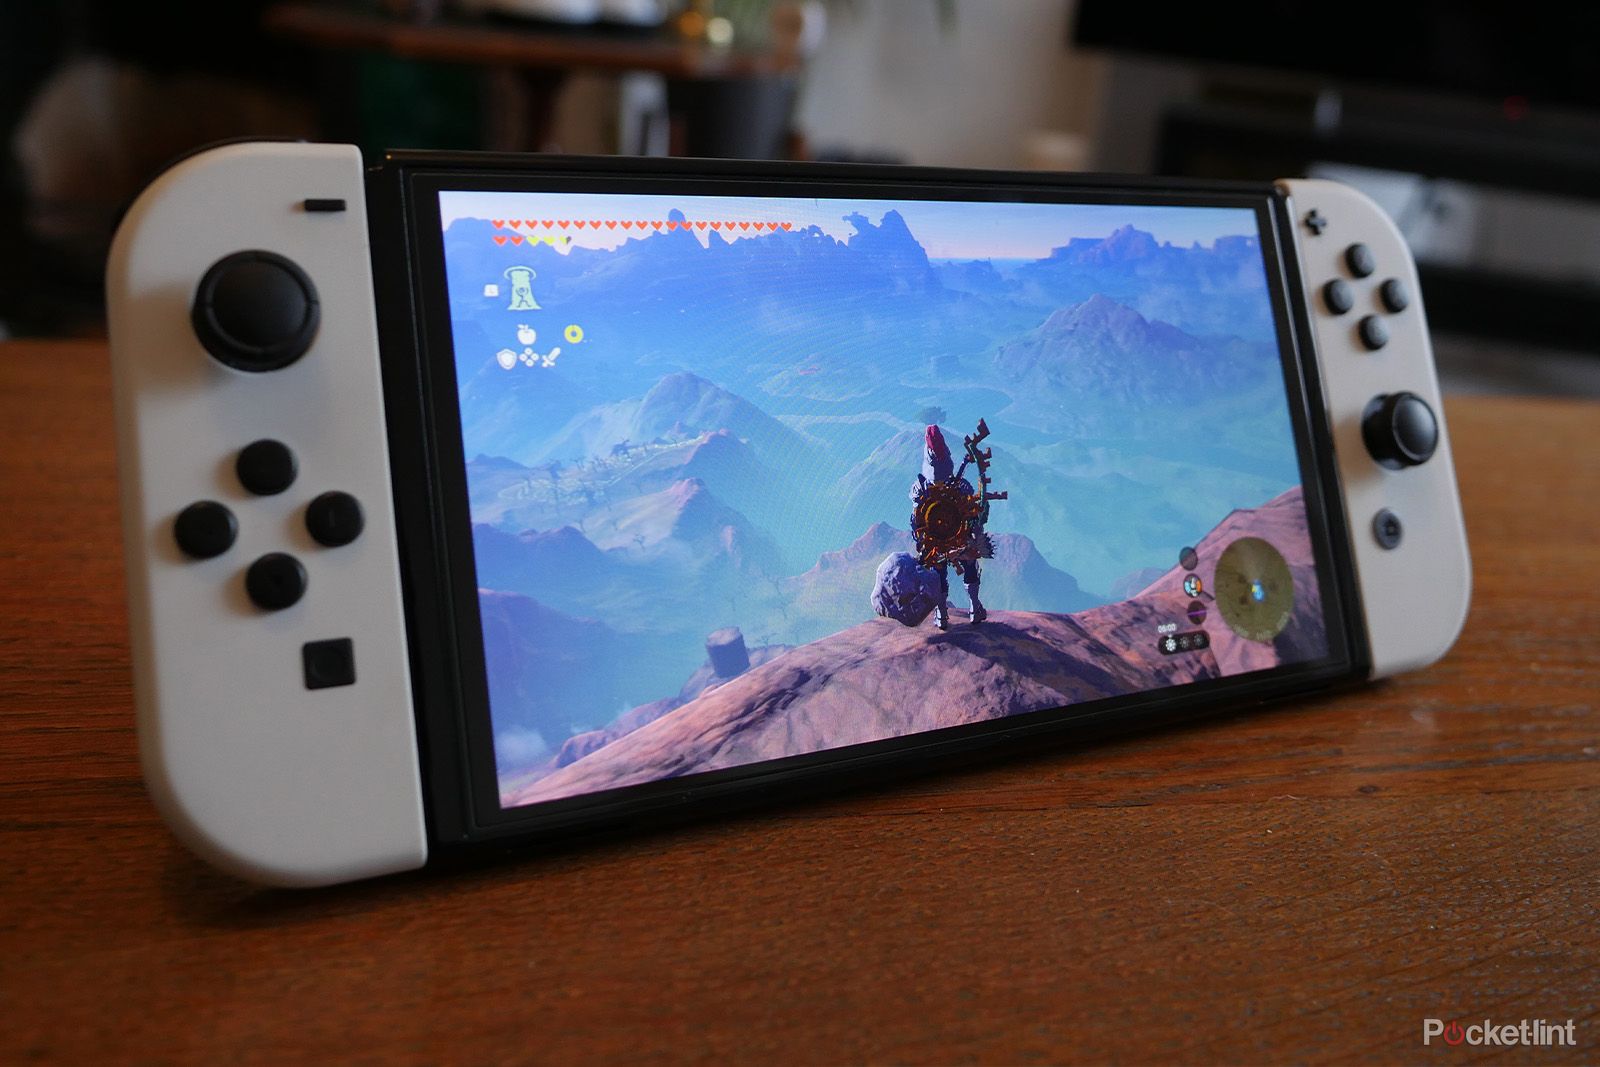 Nintendo Switch vs. OLED: What's the difference? - Deseret News